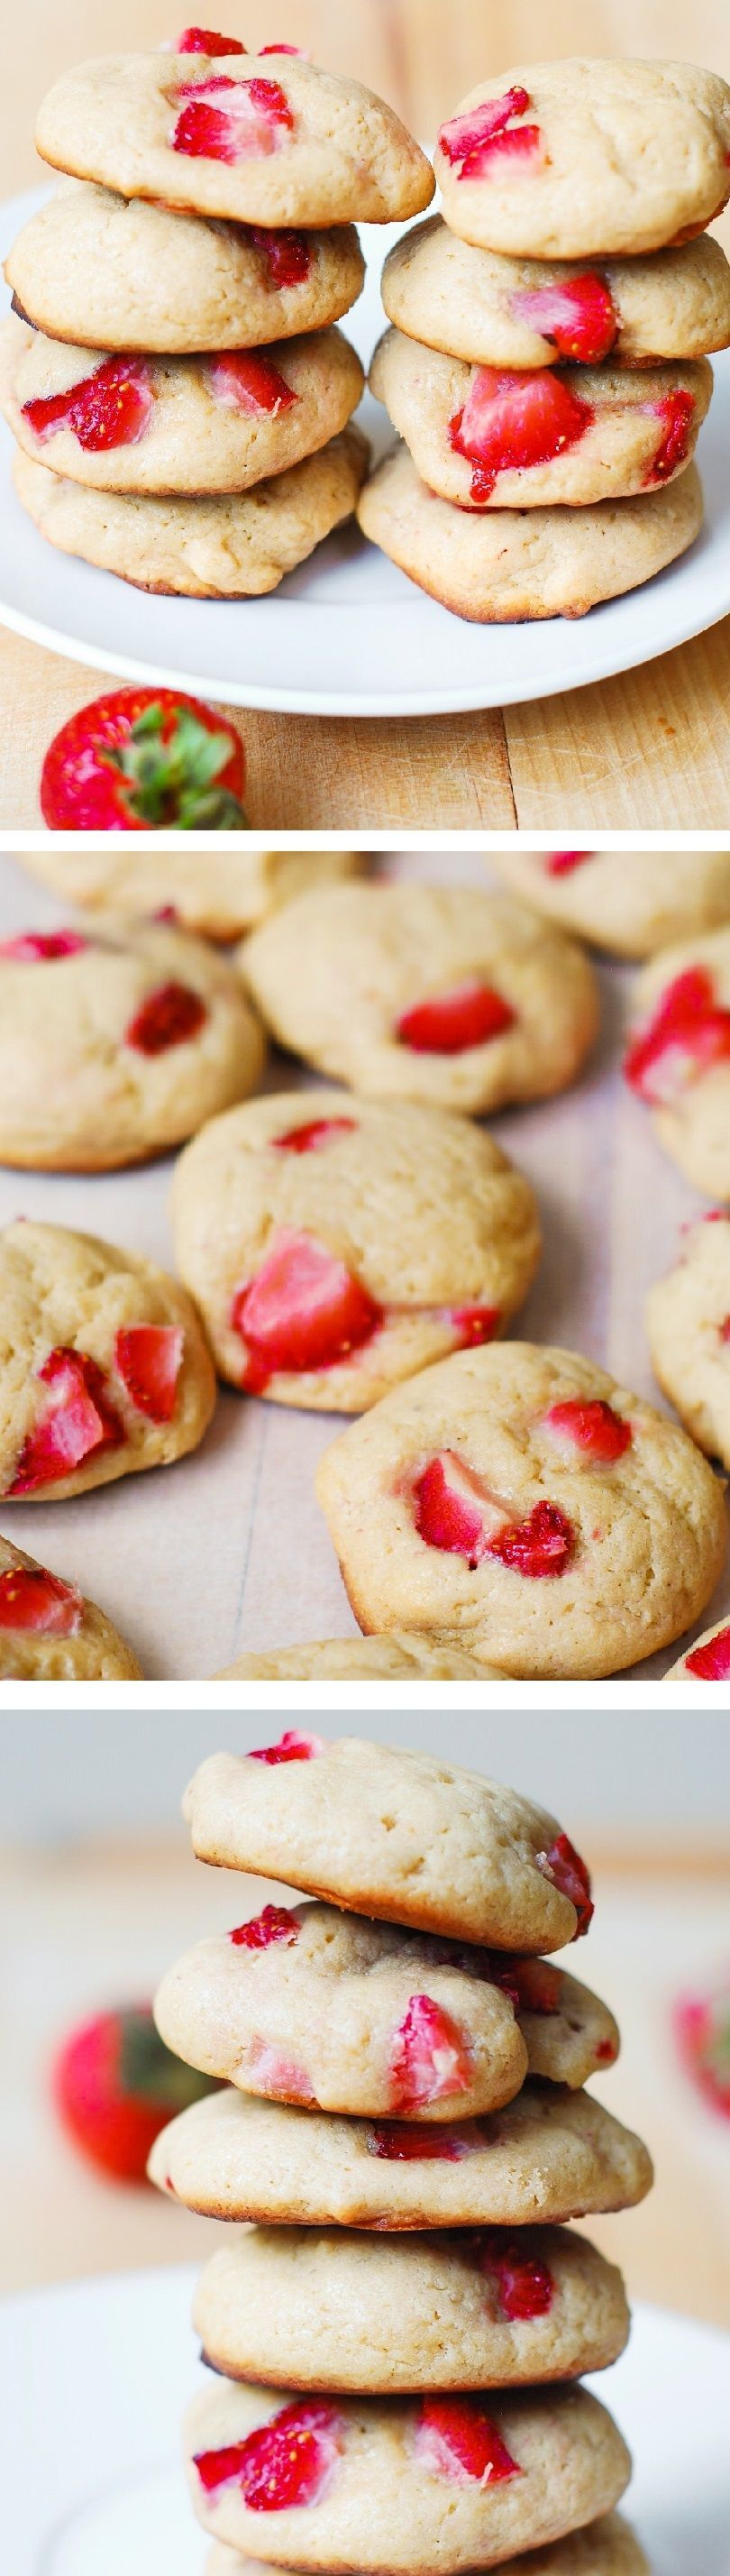 Strawberry cream cheese cookies. They taste like a strawberry cake but in a cookie form!